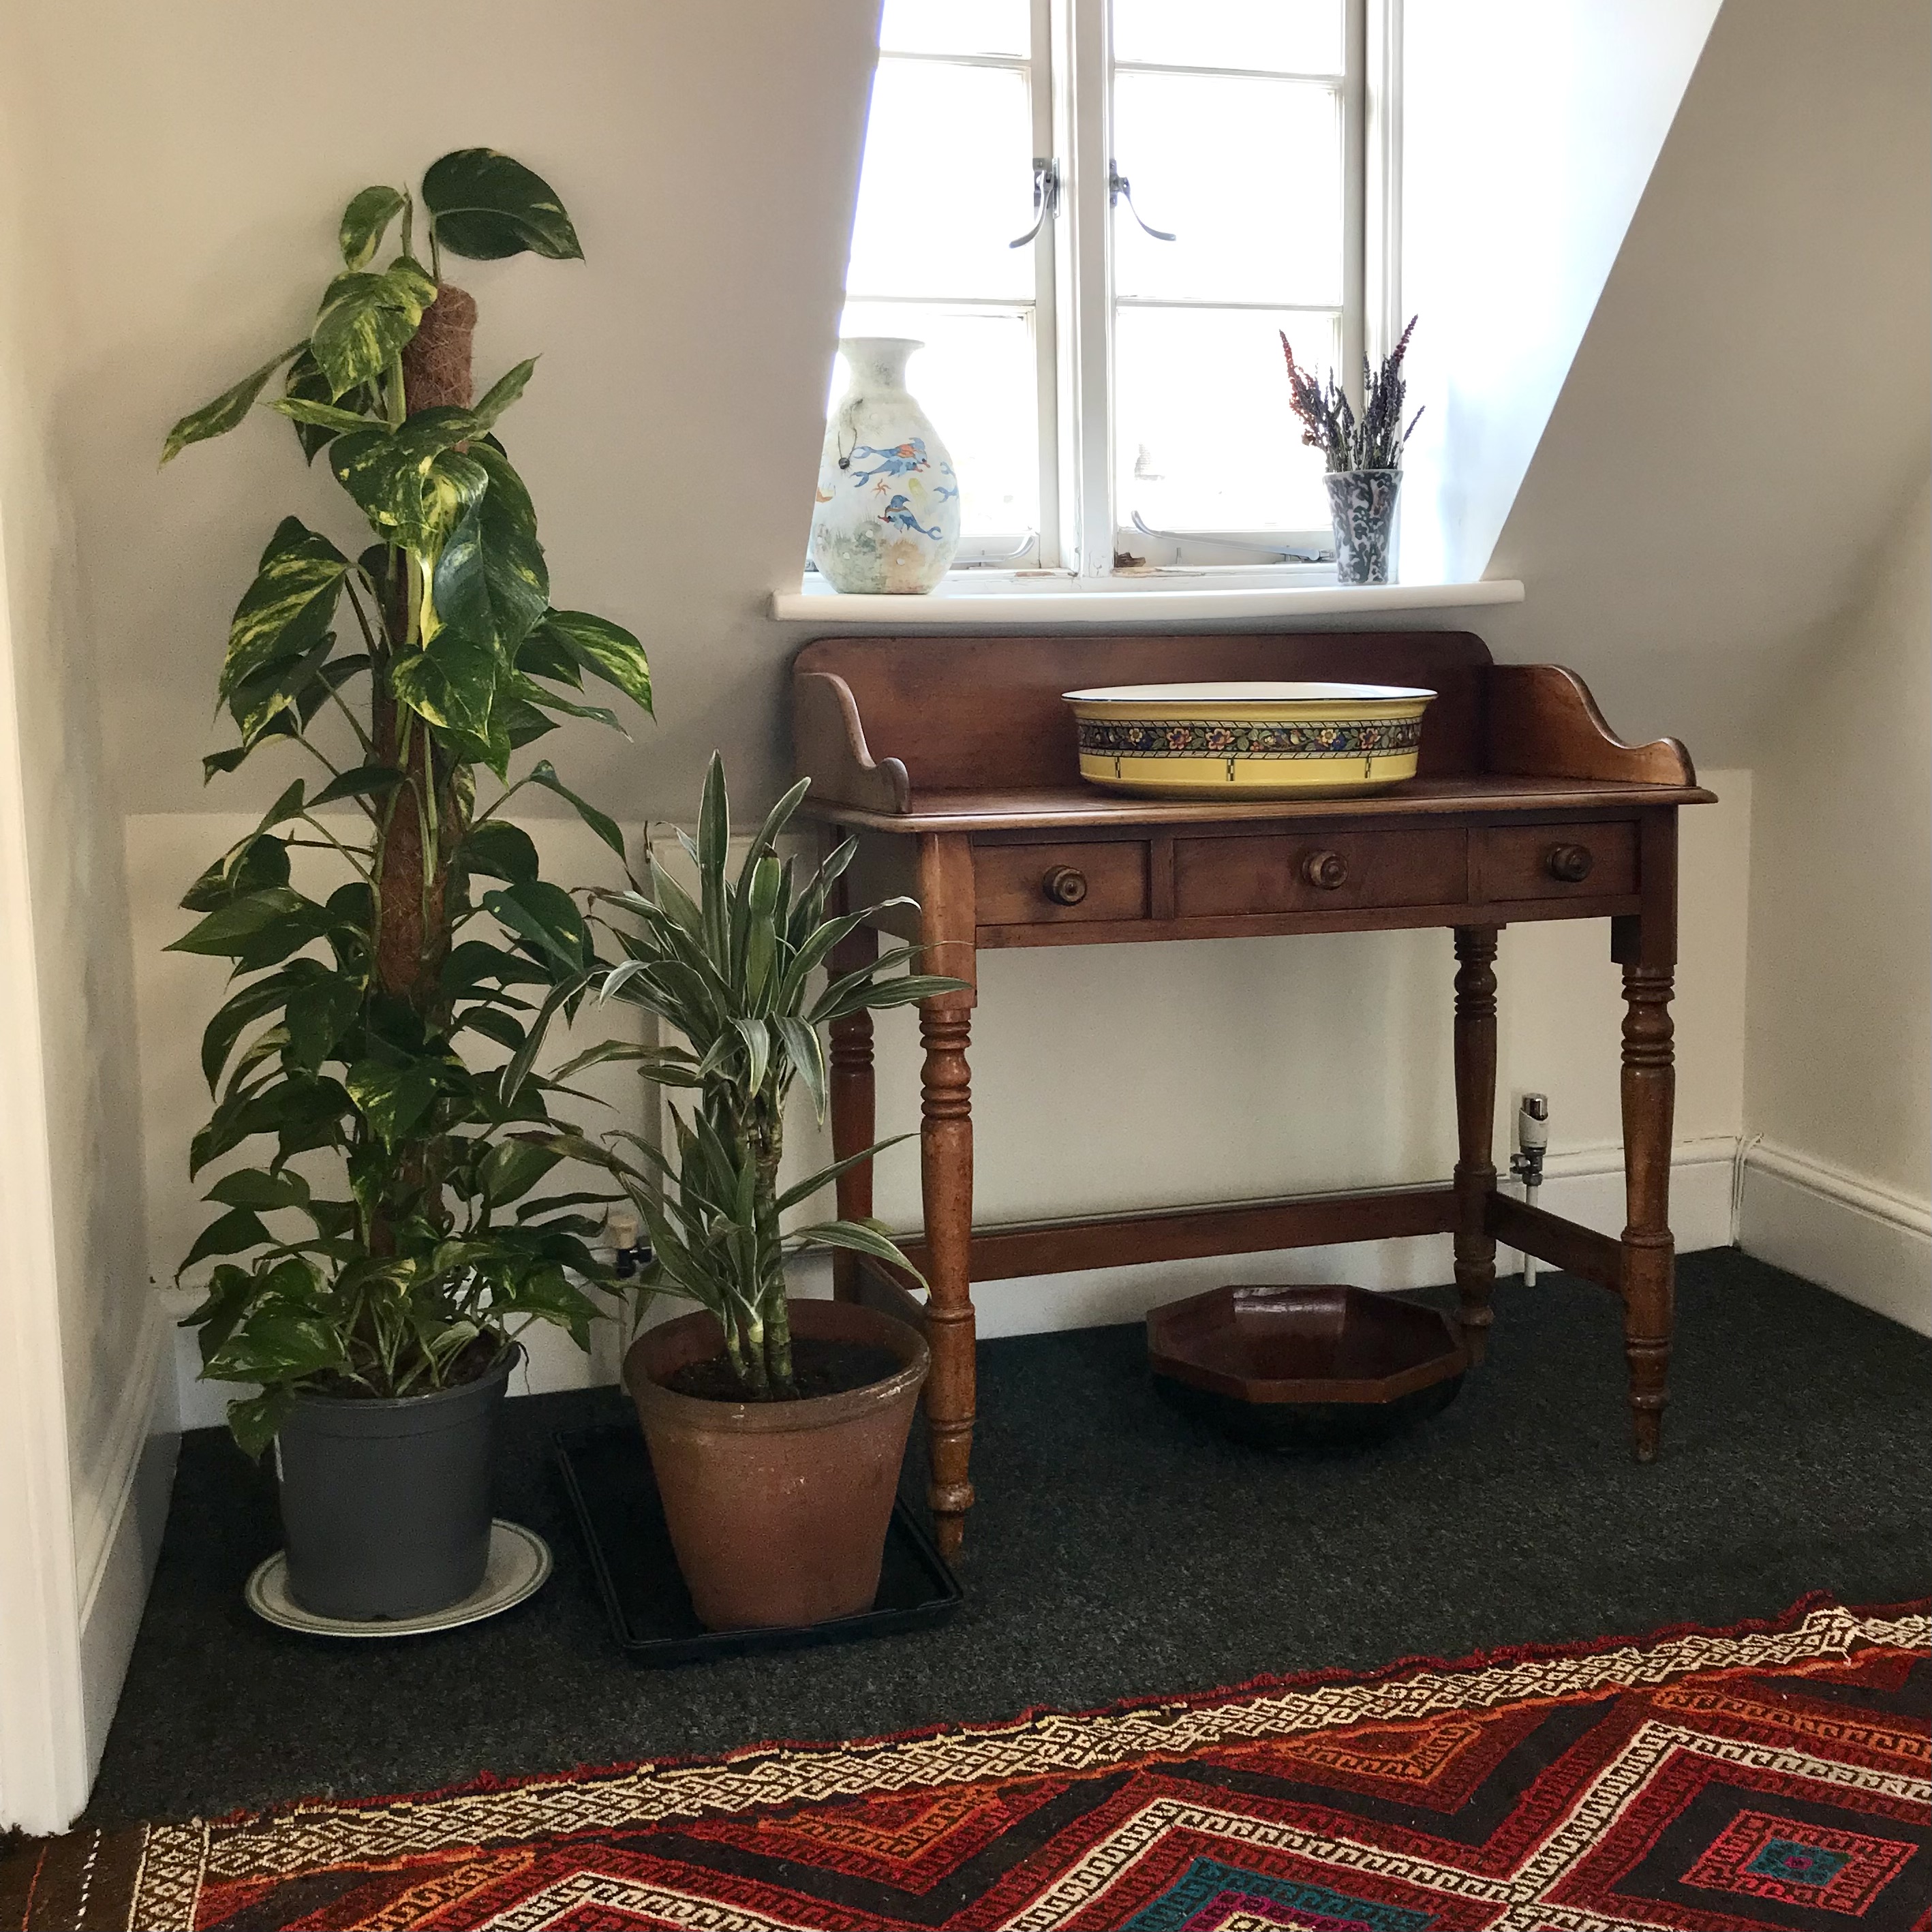 A wooden desk with plants at the top of the stairs